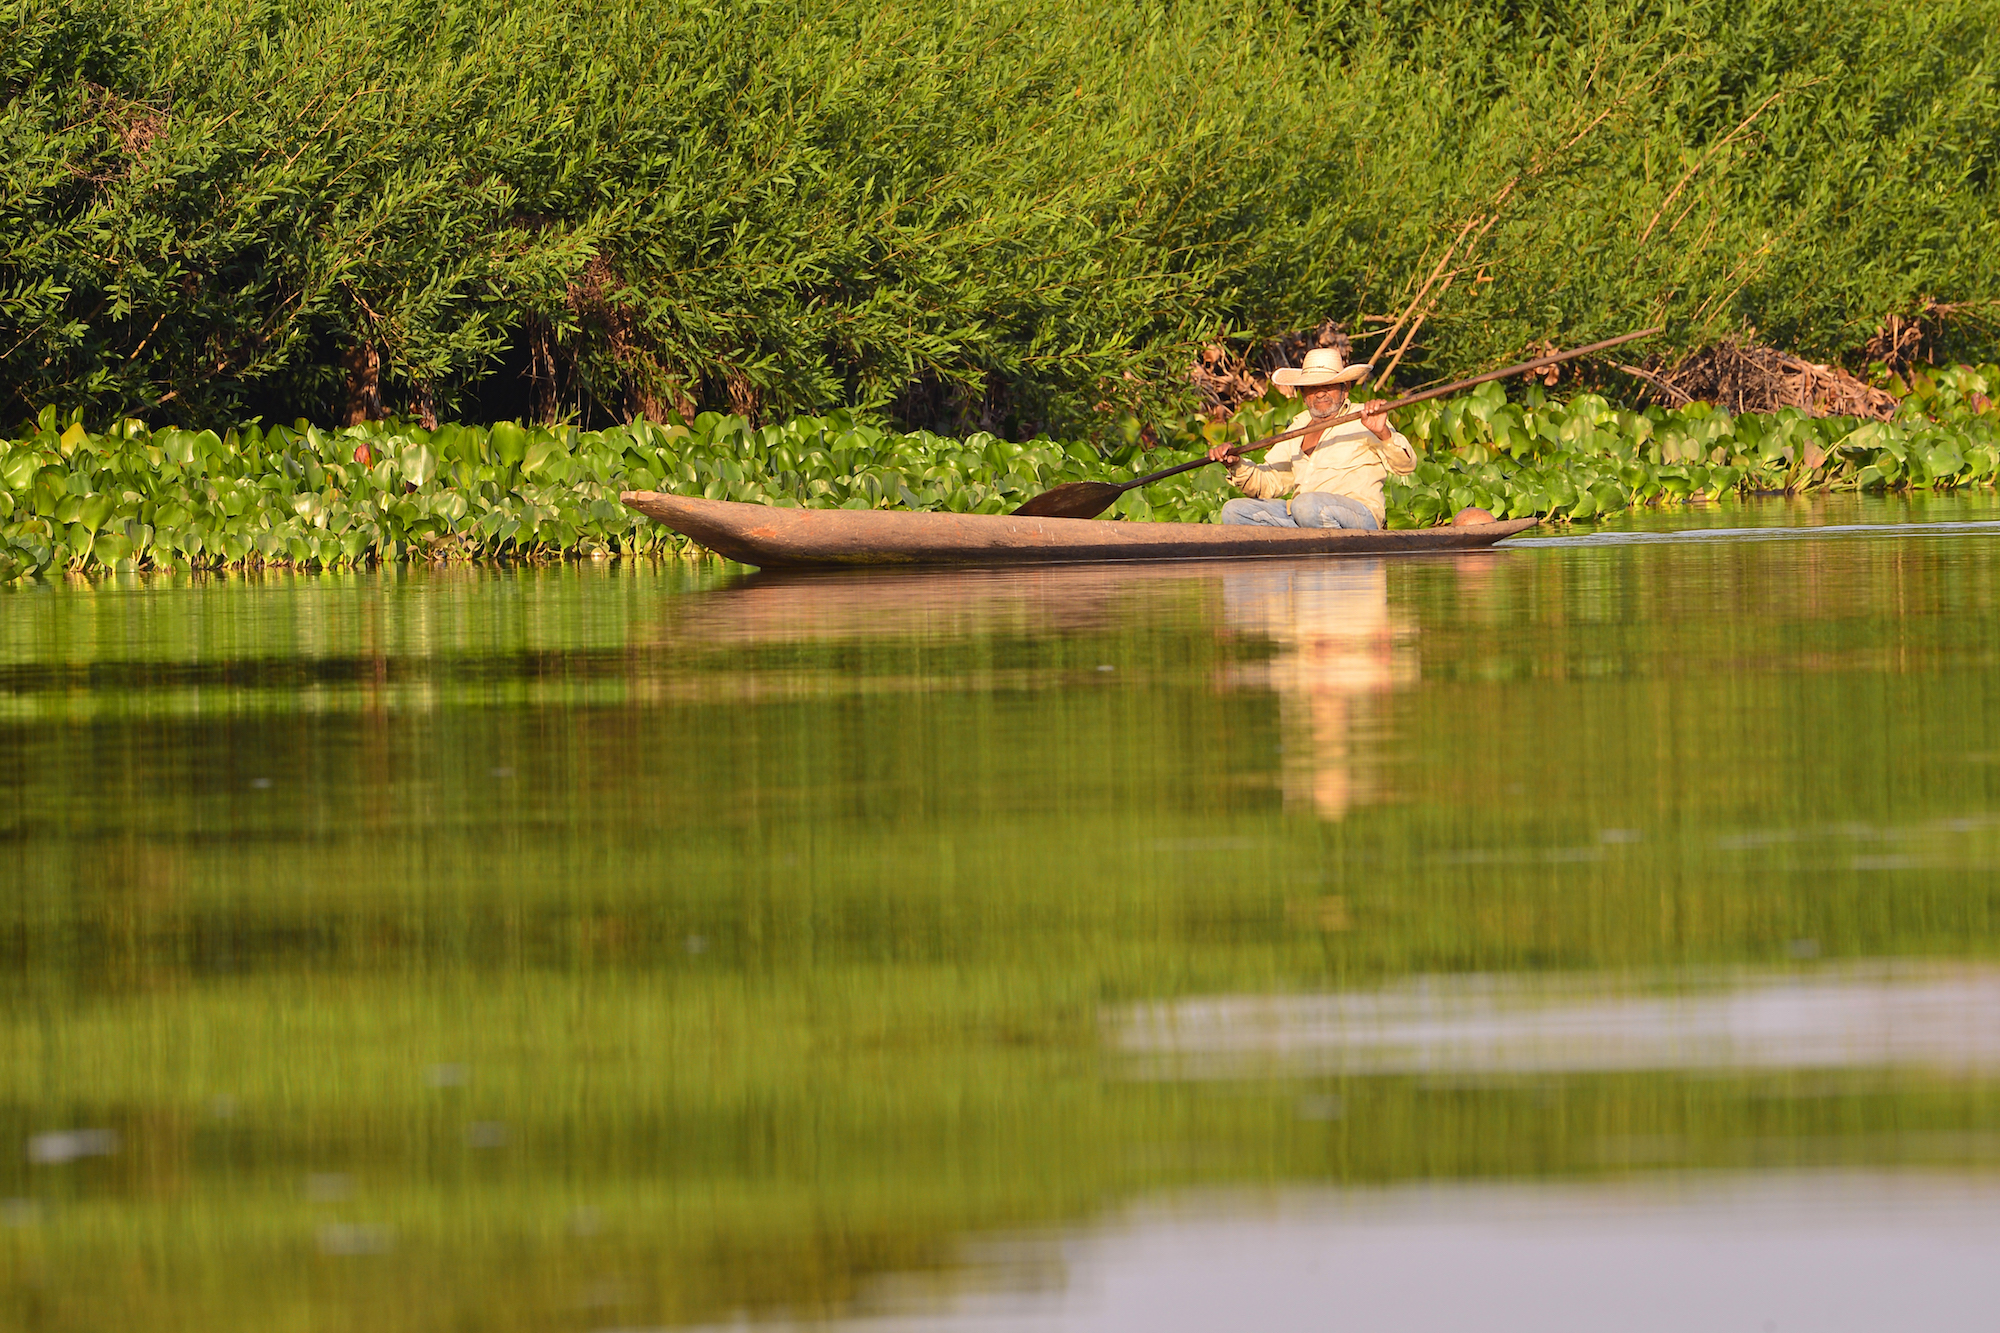 A traditional fisherman in a dugout canoe on the River Cuiaba in the Brazilian Pantanal.